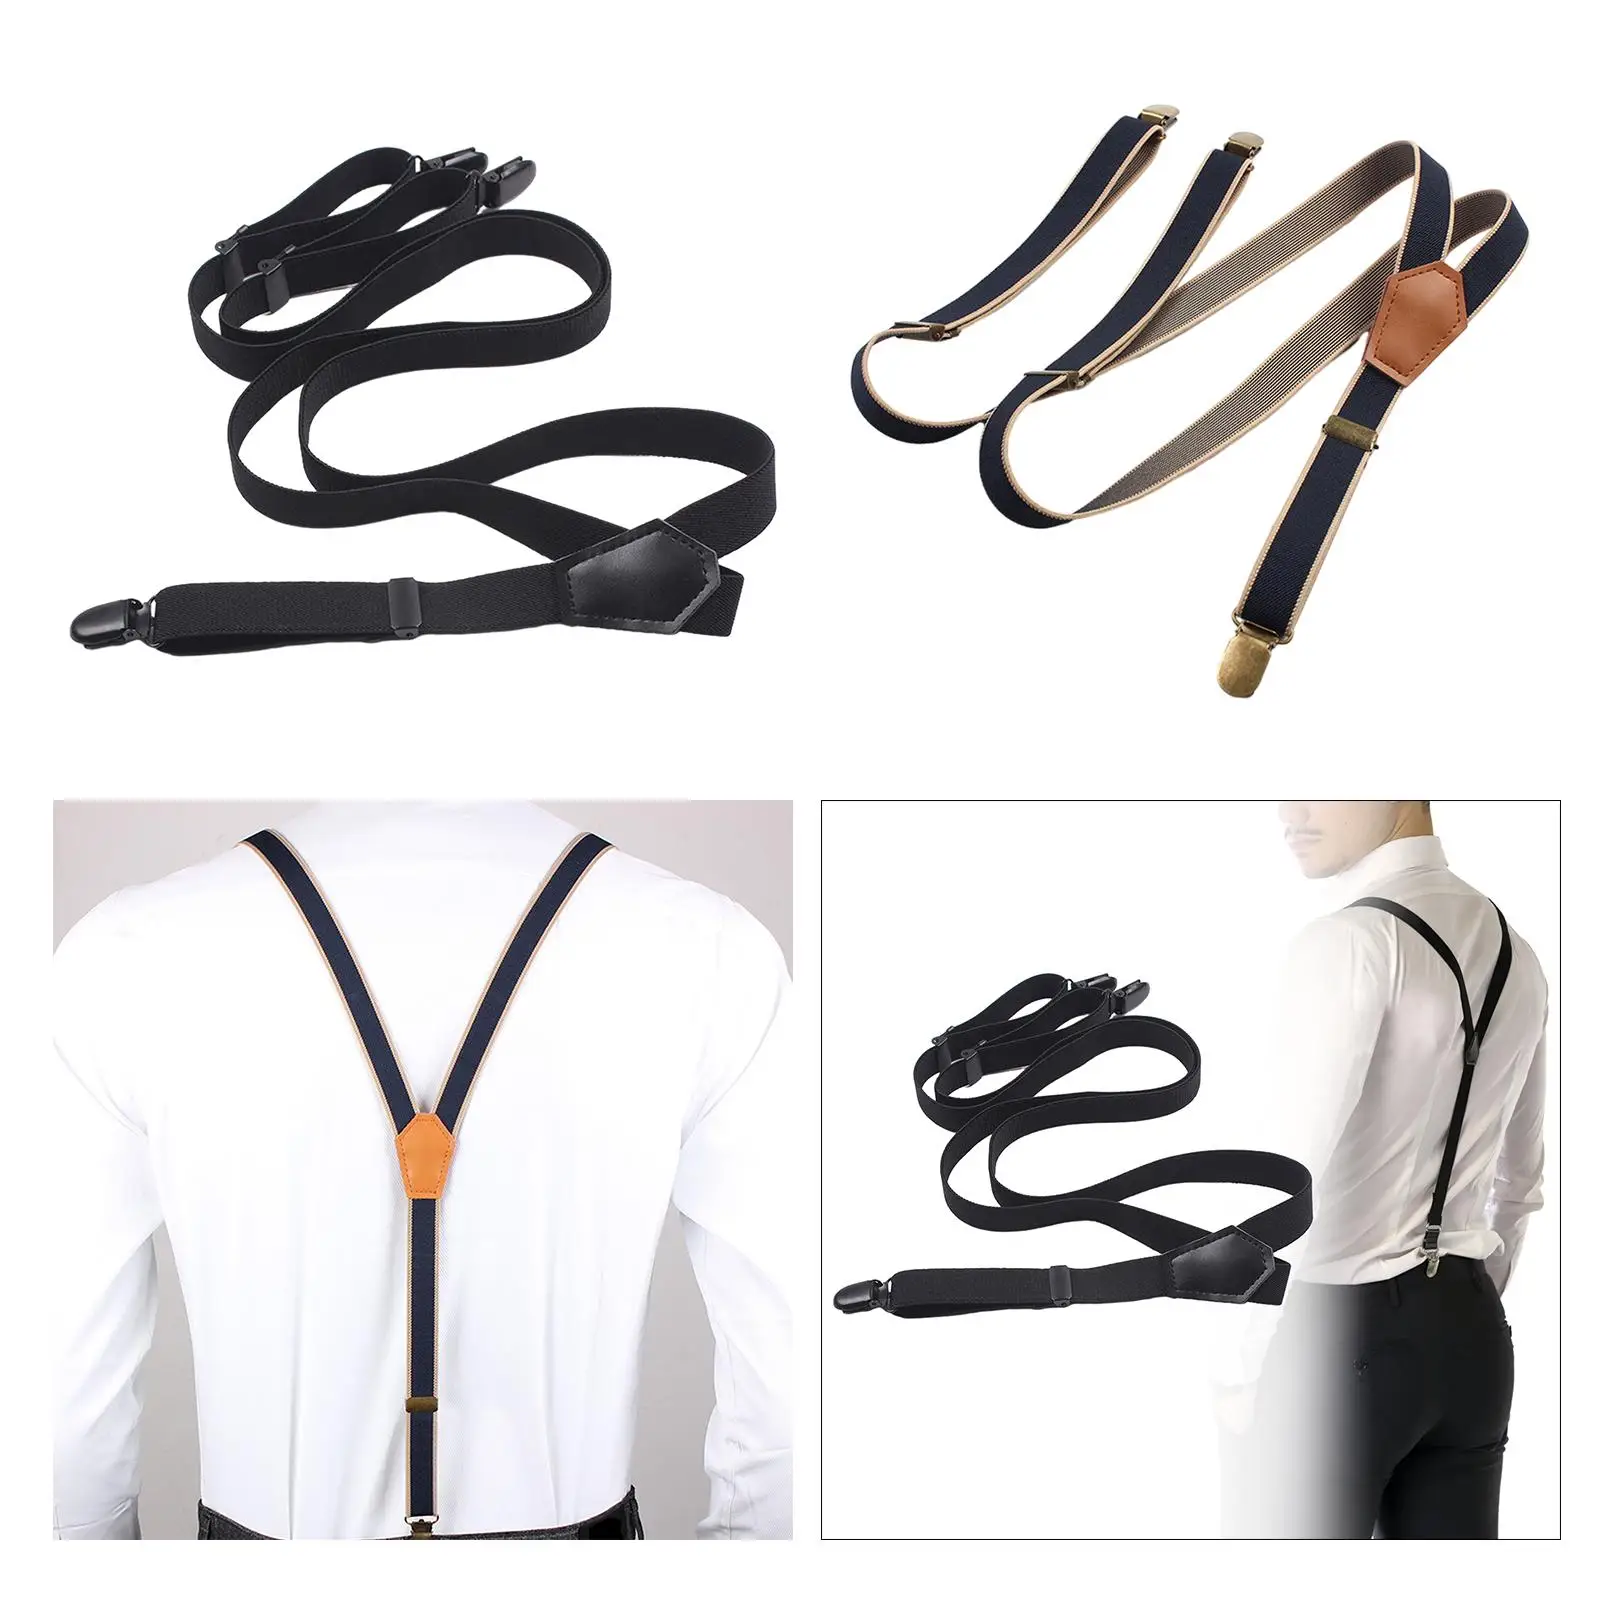 Men`s Suspenders Leather Strap Fashion Adjustable Belt Trousers Braces for Business Wedding Formal Events Father/husband`s Gift